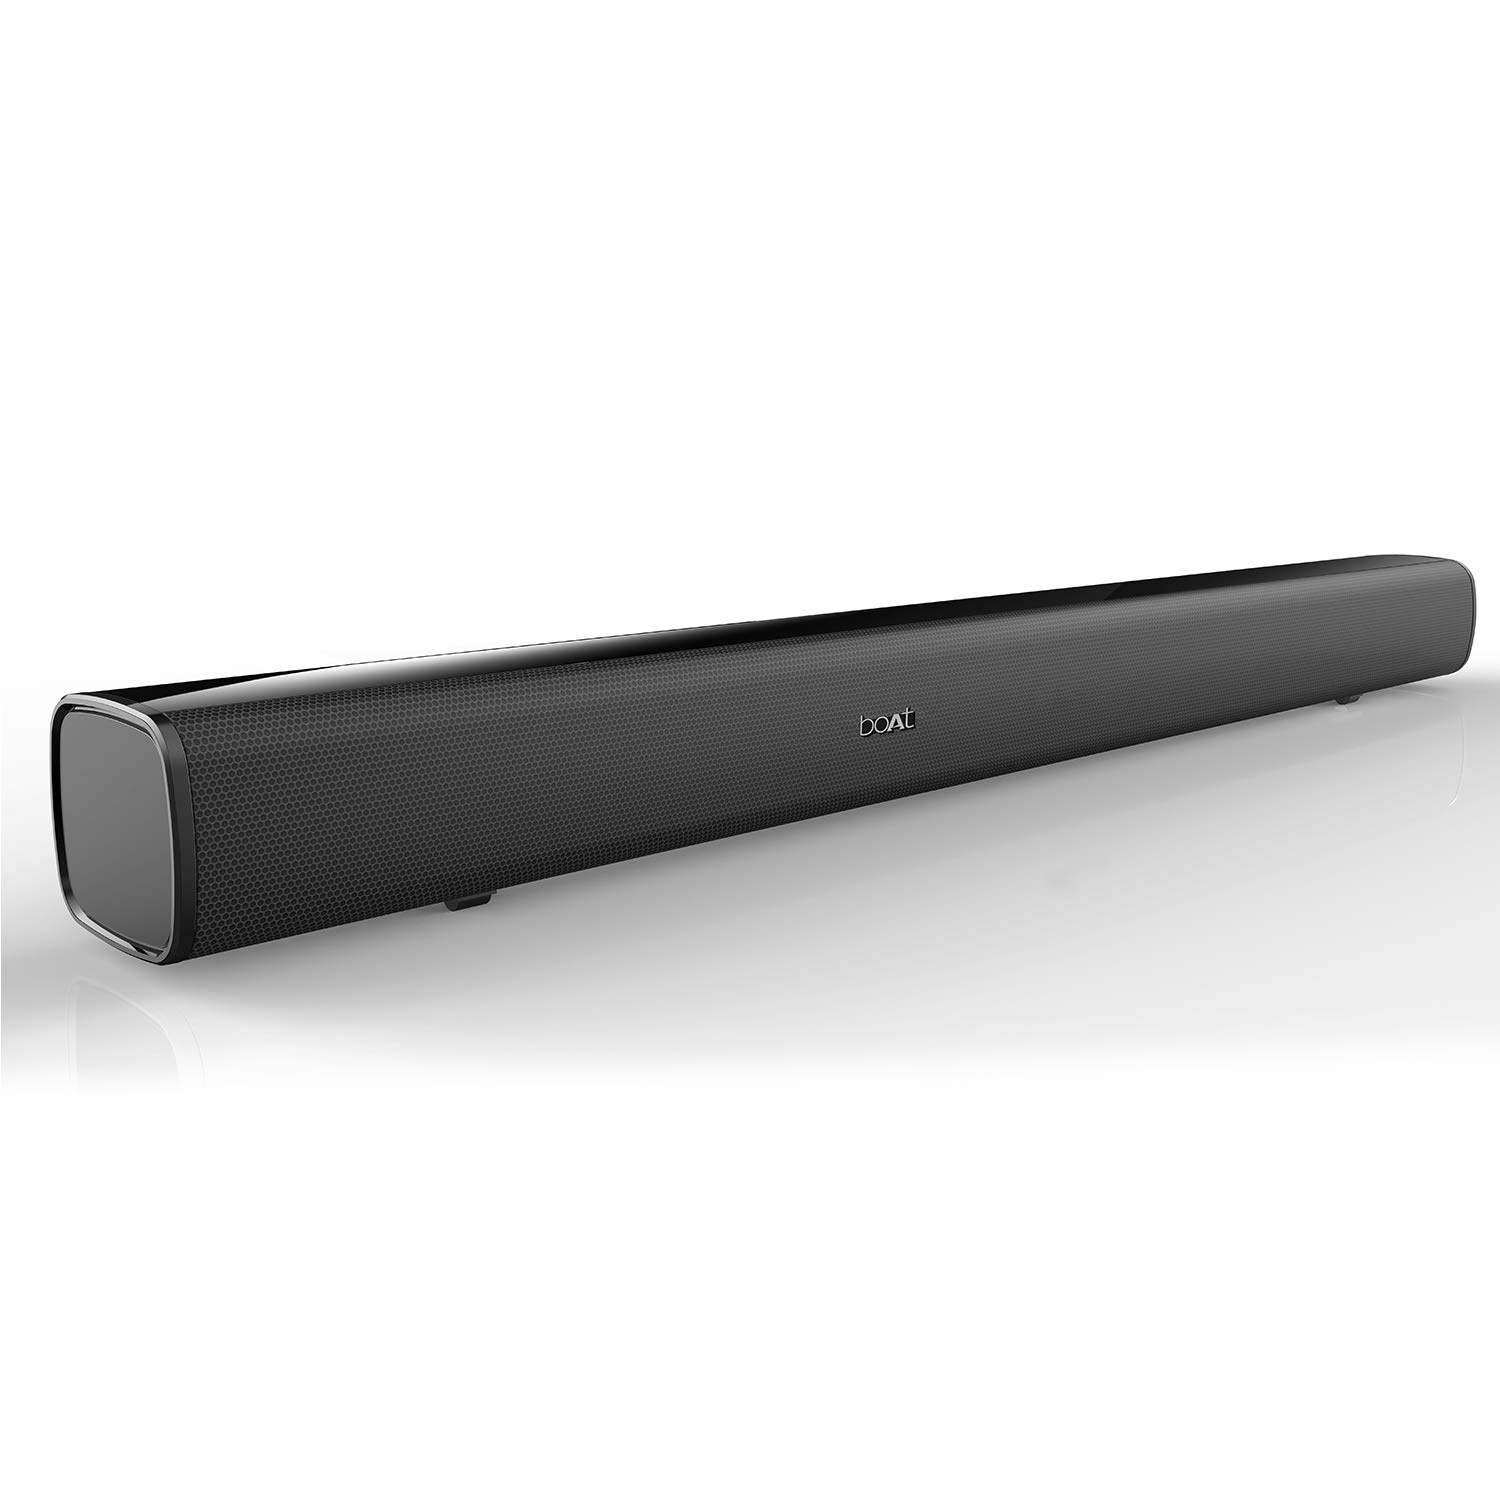 Amazon Sale: Not only Diwali, this sound bar is the life of every festival and party, know about the best selling sound bar in Amazon Sale